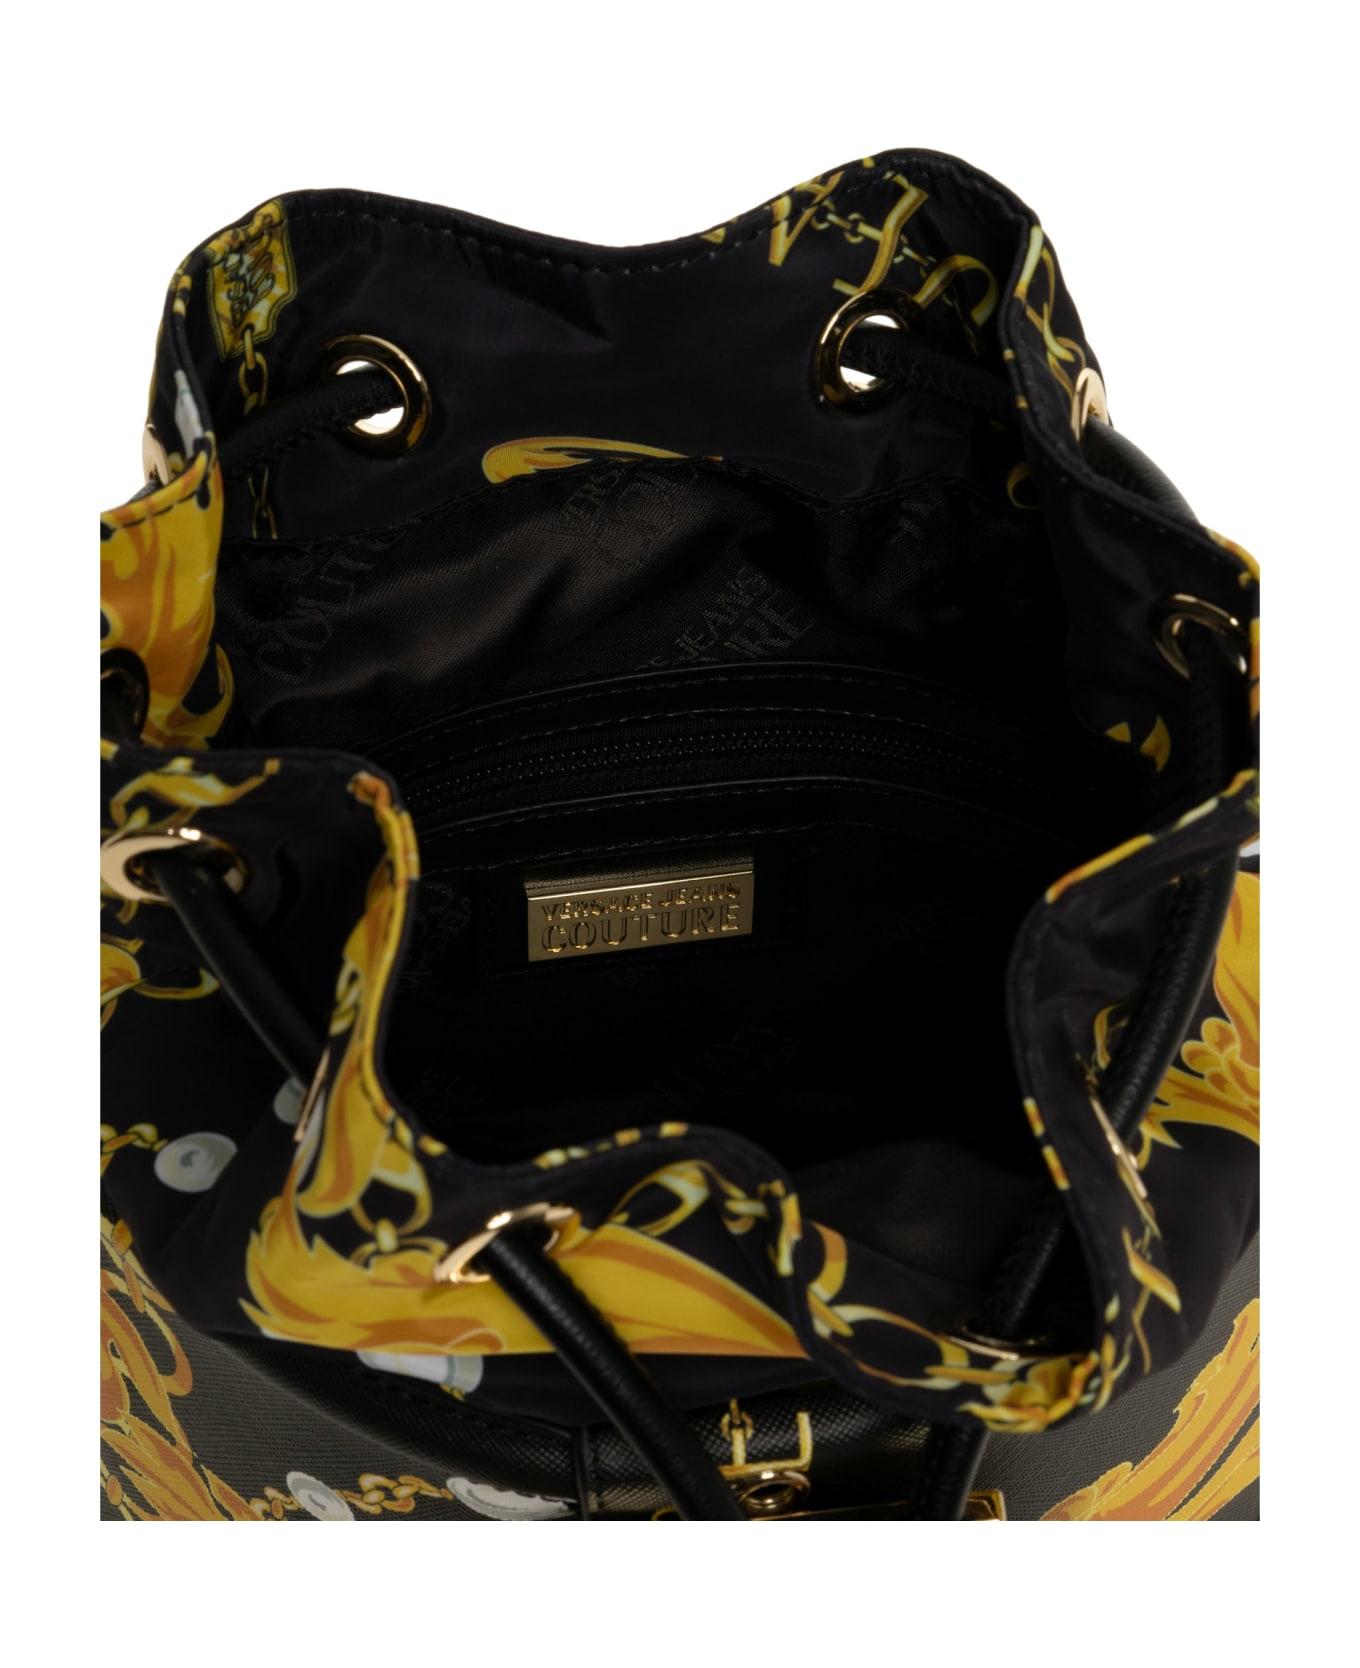 Versace Jeans Couture Chain Couture Bucket Bag - Black